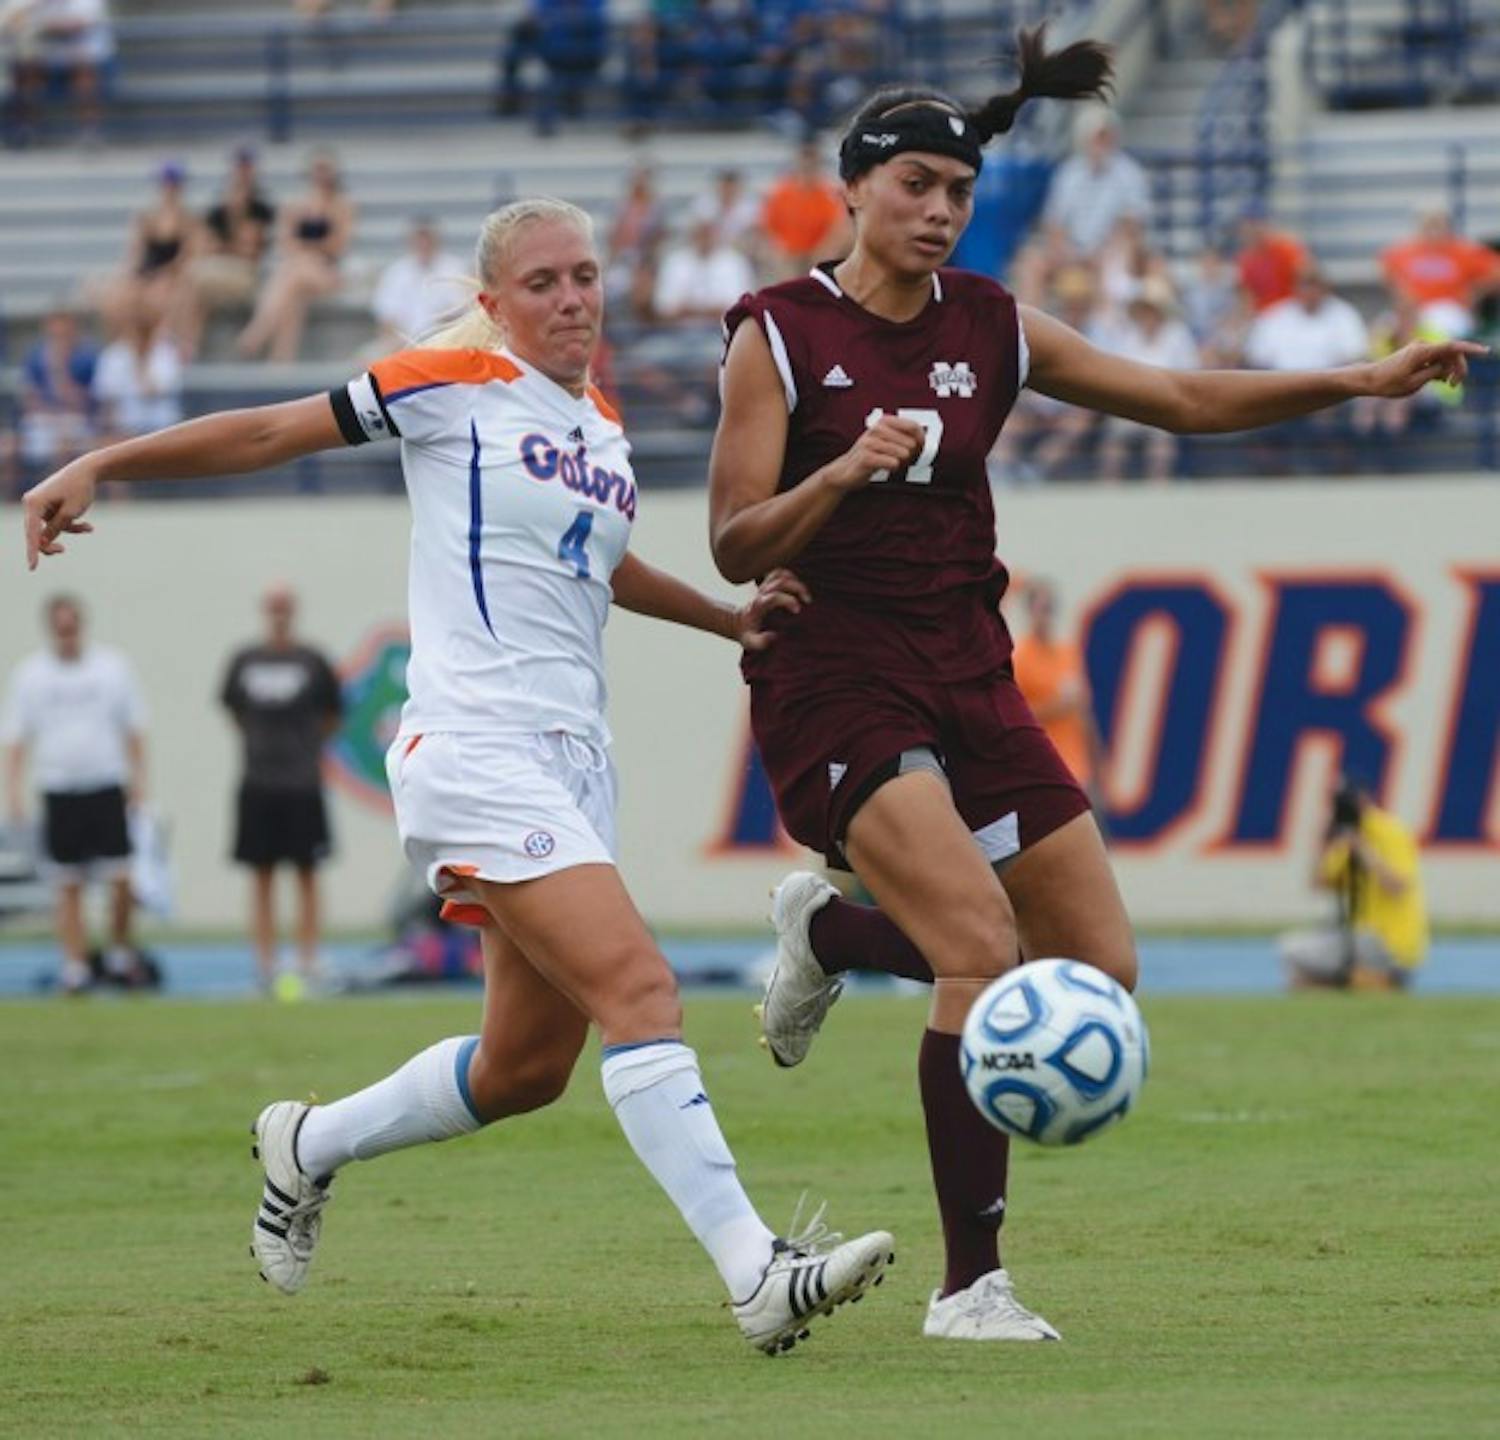 Forward McKenzie Barney (4) battles for the ball against Mississippi State’s Shannen Jainudeen (17) in Florida’s 4-1 win on Sunday at James G. Pressly Stadium. Barney has scored five goals this season.